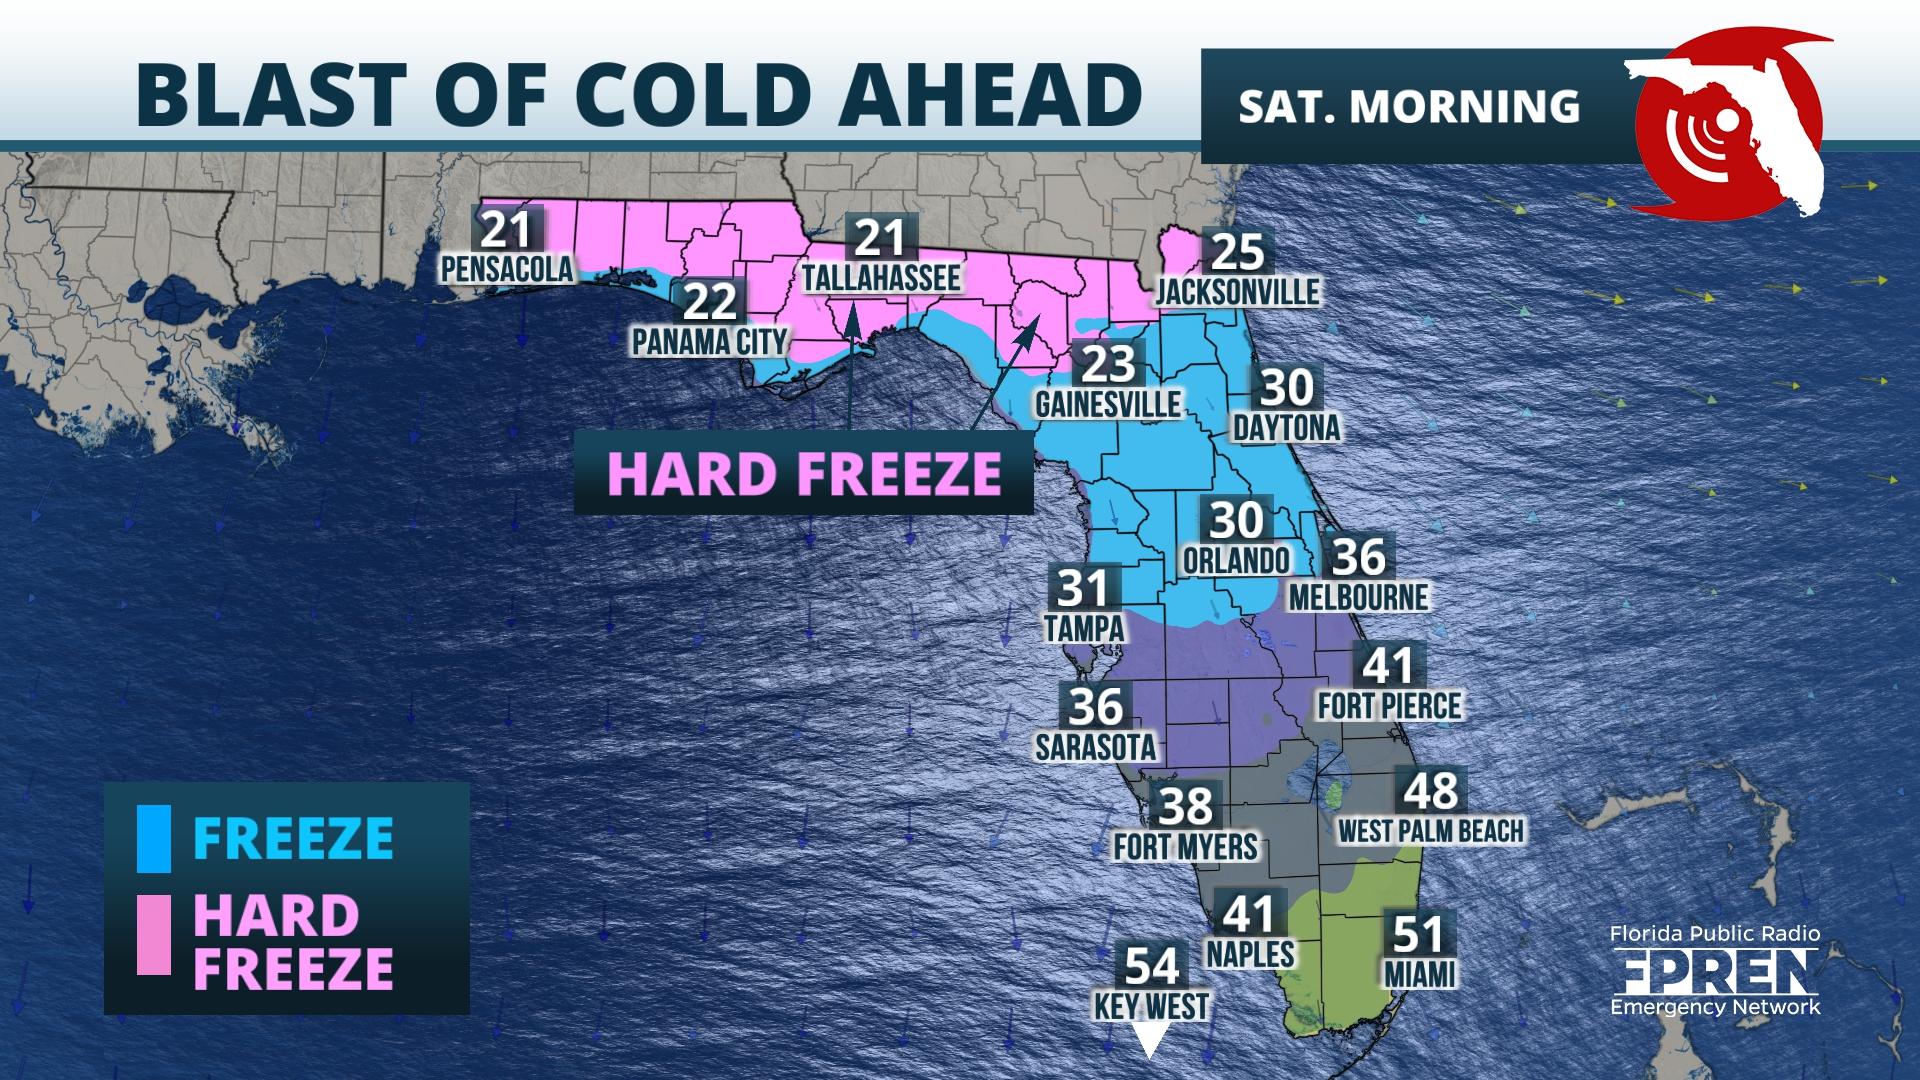 Featured image for “Blast of cold air will plunge some temps into the teens”